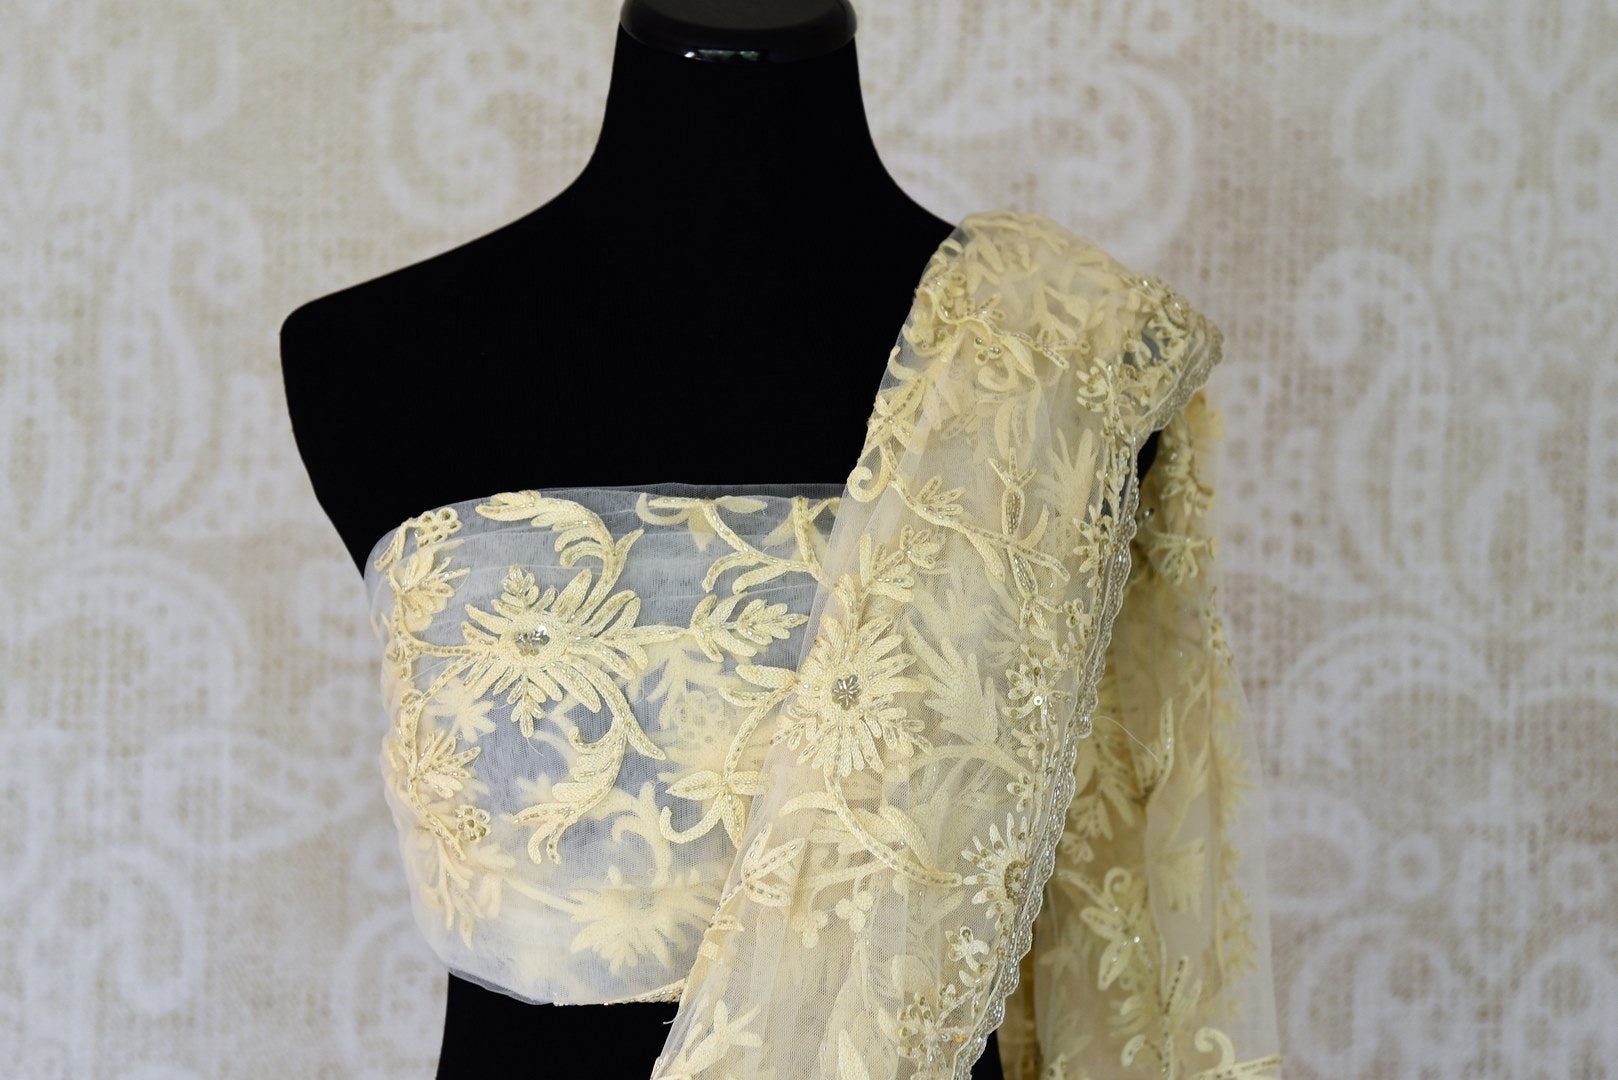 Buy off-white embroidered net saree online in USA. Adorn your style with a range of exquisite sarees with blouses from Pure Elegance Indian clothing store in USA. We have an exquisite range of Indian designer sarees, silk sarees, Banarasi saris and many other varieties also available at our online store.-blouse pallu